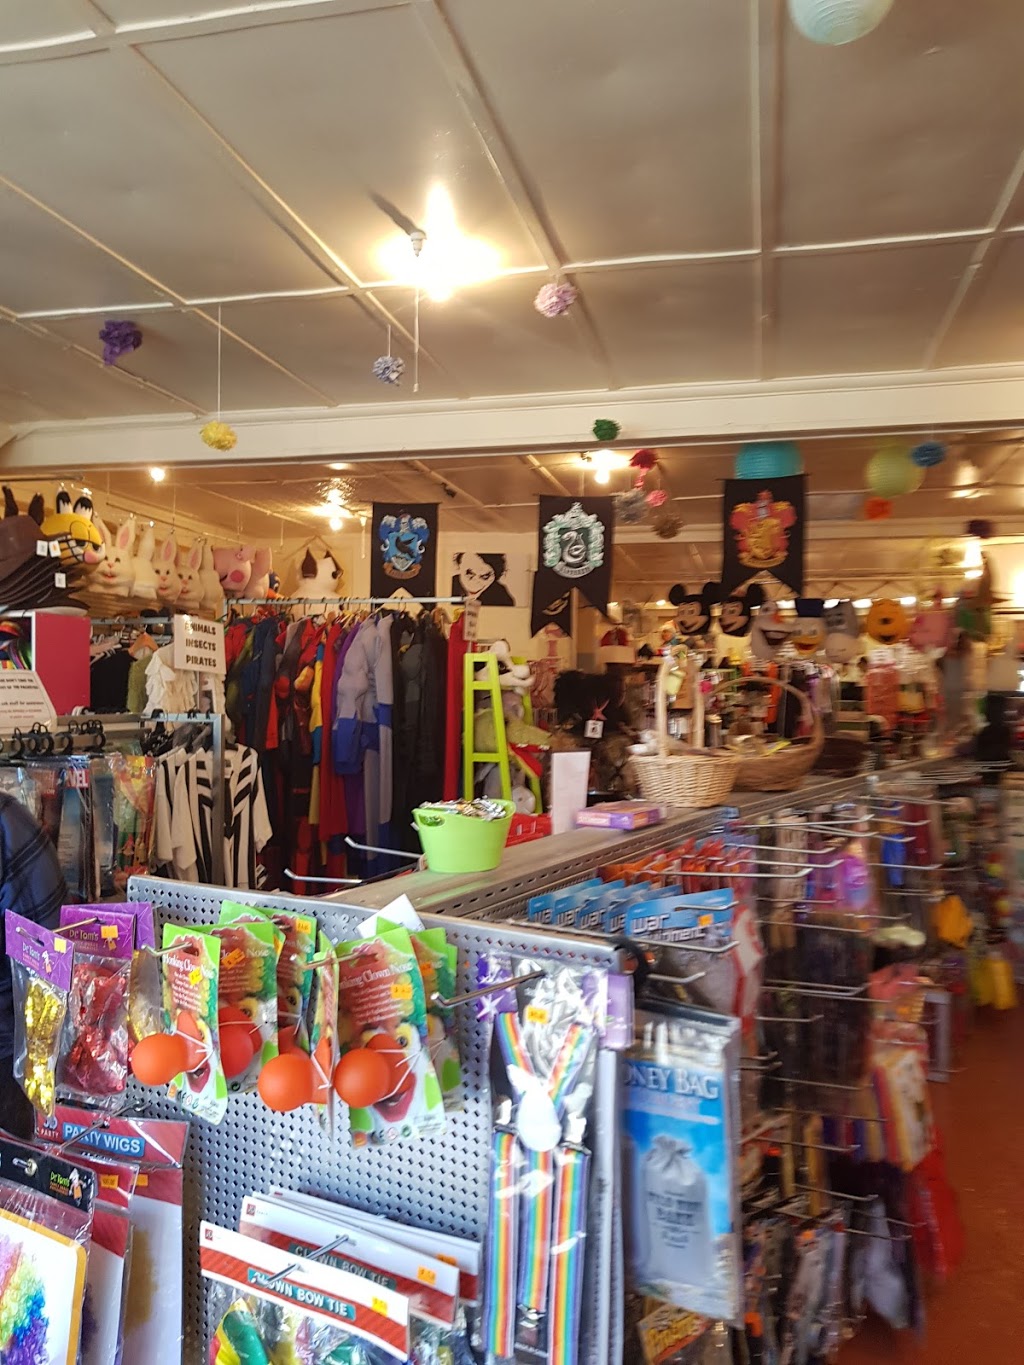 Getcha Gearon Costumes | clothing store | 151 Mercer St, Geelong VIC 3220, Australia | 0352981579 OR +61 3 5298 1579